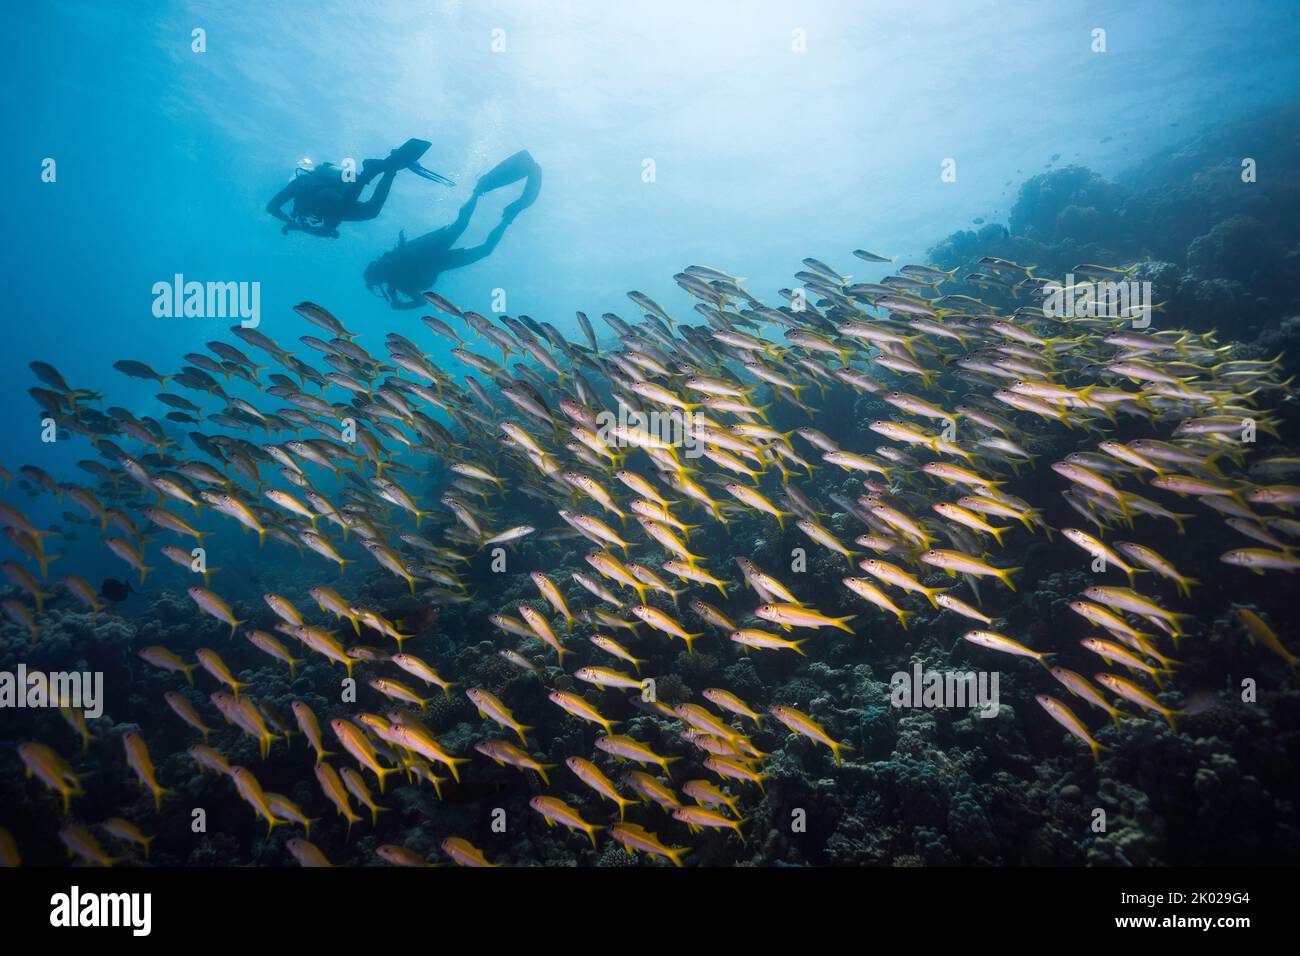 A large school of Yellowfin goatfish (Mulloidichthys vanicolensis) swimming over the reef with the silhouettes of two scuba divers in the background Stock Photo